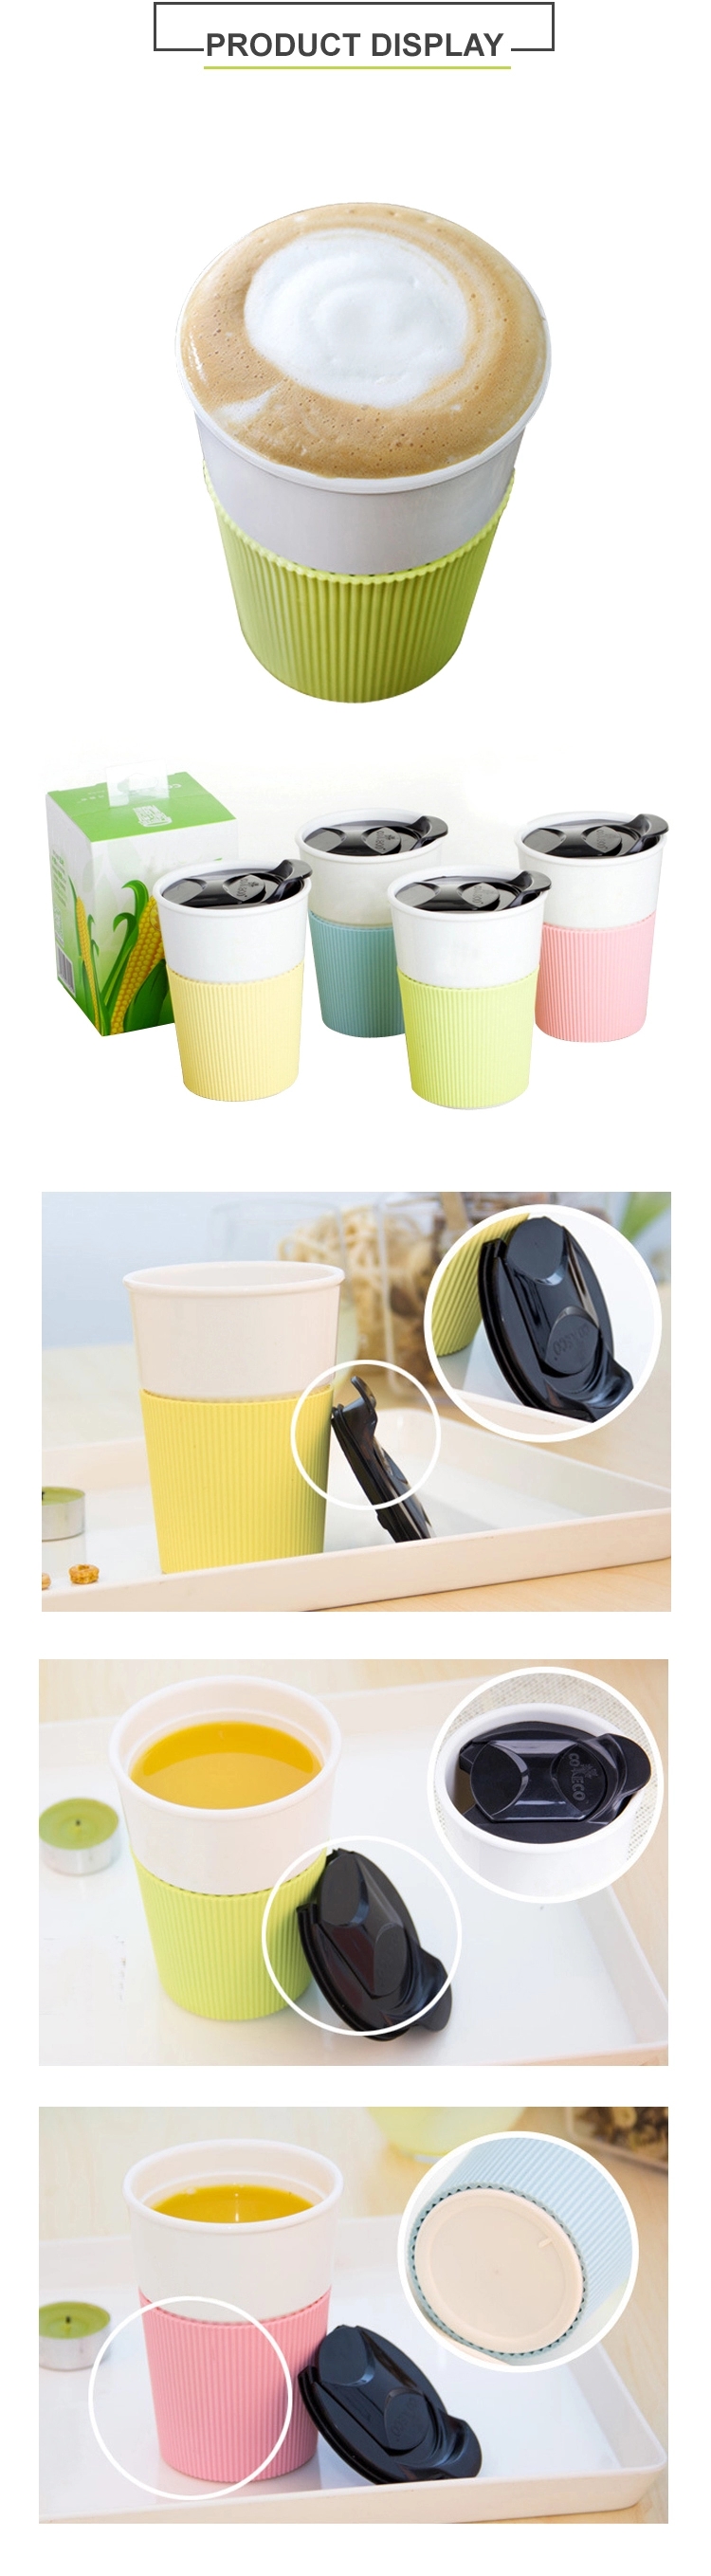 New products outdoor portable biodegradable reusable pla bamboo fiber coffee mug with lid